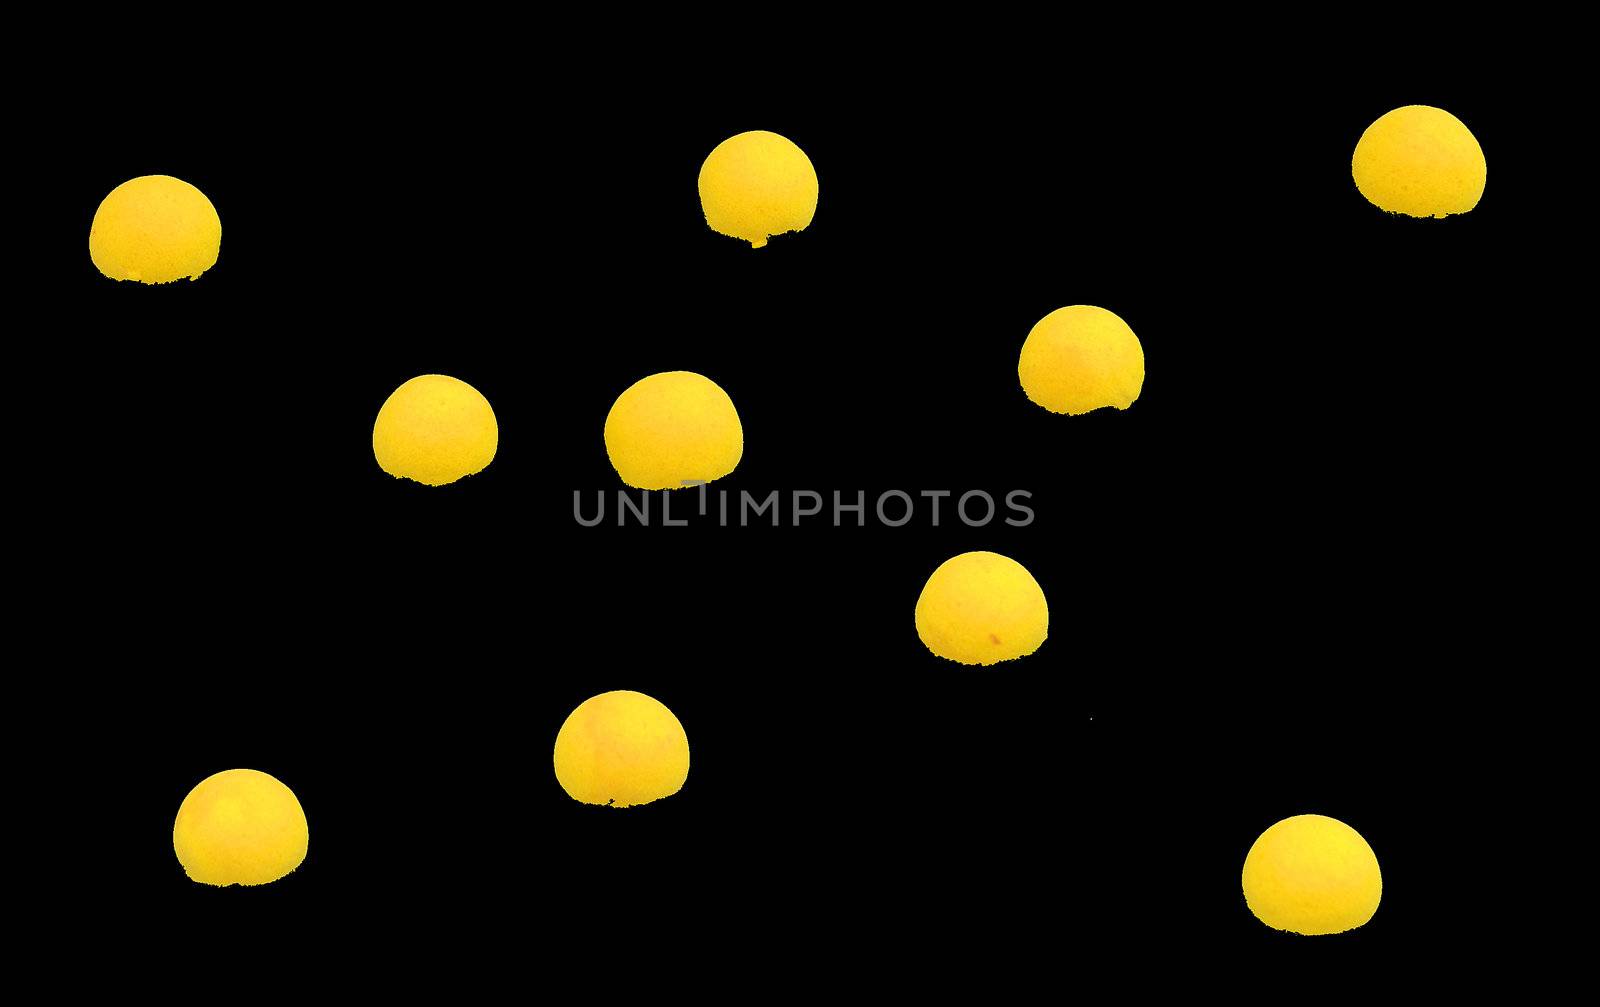 Small number of yellow spheres on black background